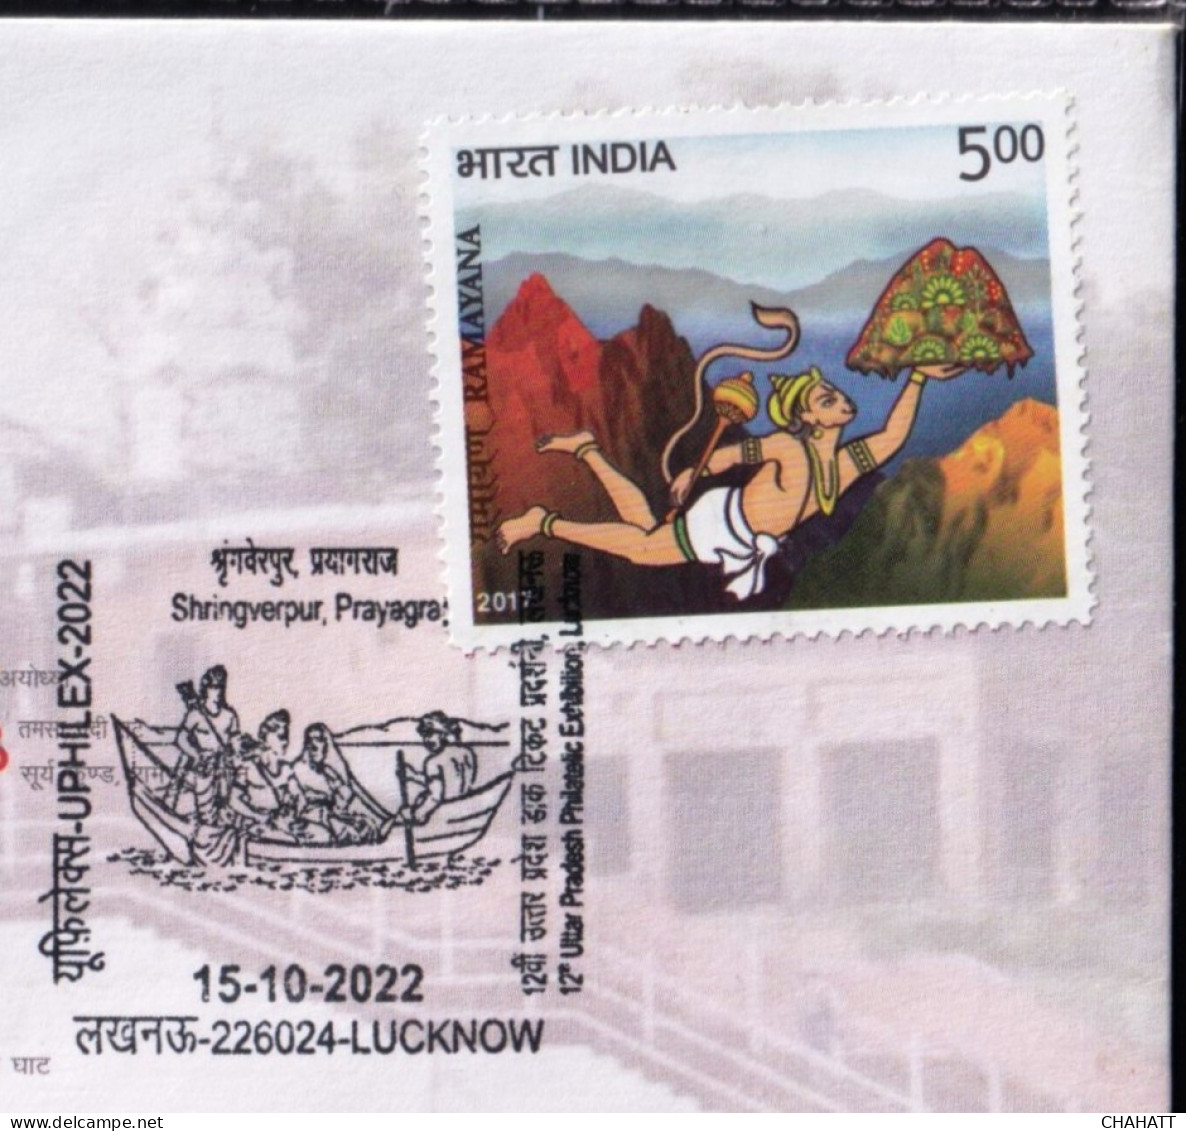 HINDUISM - RAMAYAN- SRINGESWAR- RIVER CROSSING BY BOAT - PICTORIAL CANCELLATION - SPECIAL COVER - INDIA -2022- BX4-23 - Induismo